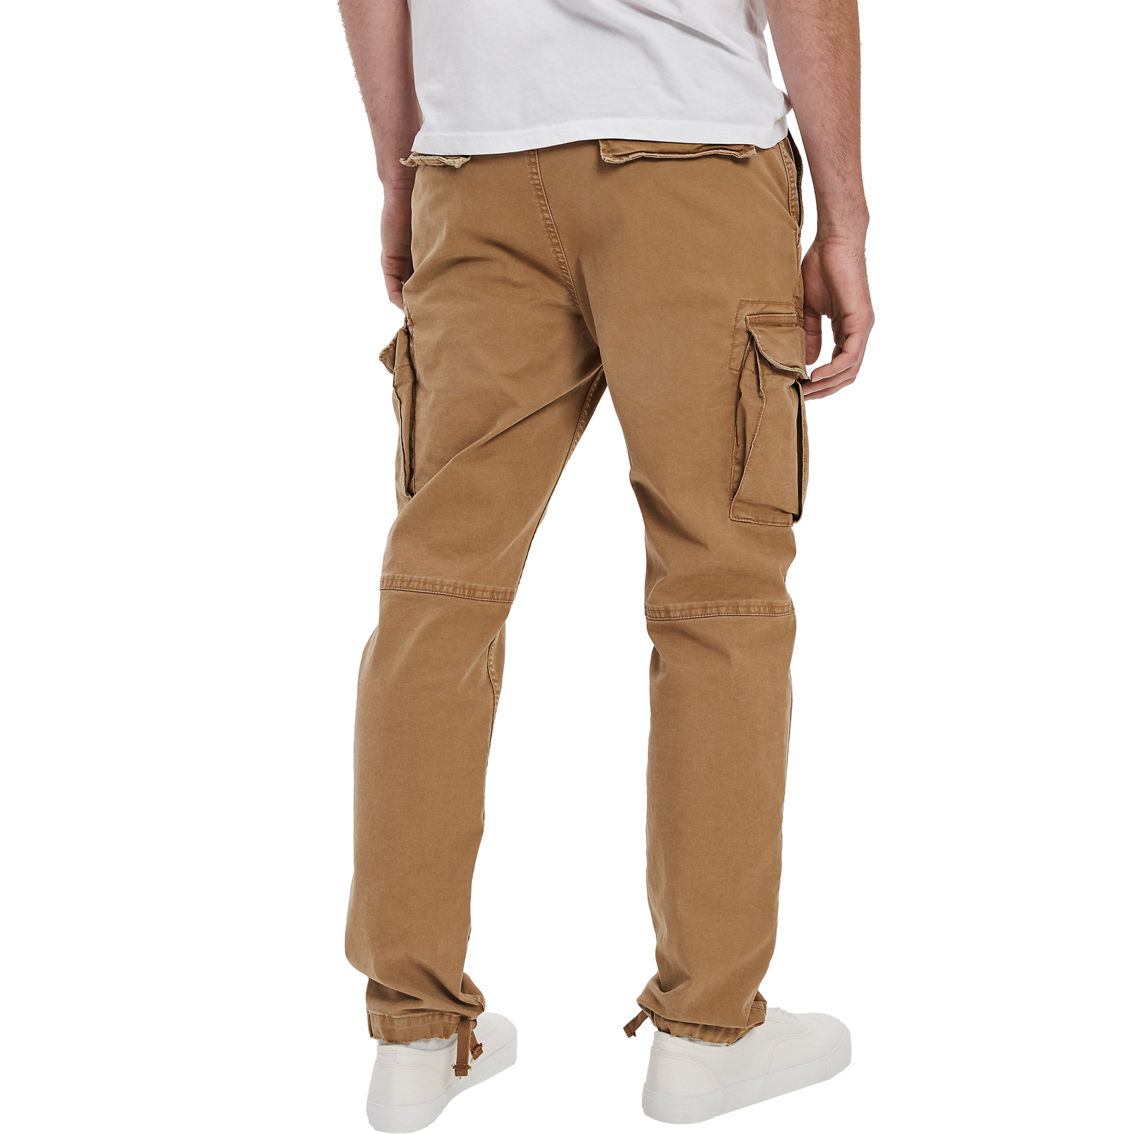 American Eagle Flex Slim Lived-in Cargo Pants | Pants | Clothing ...